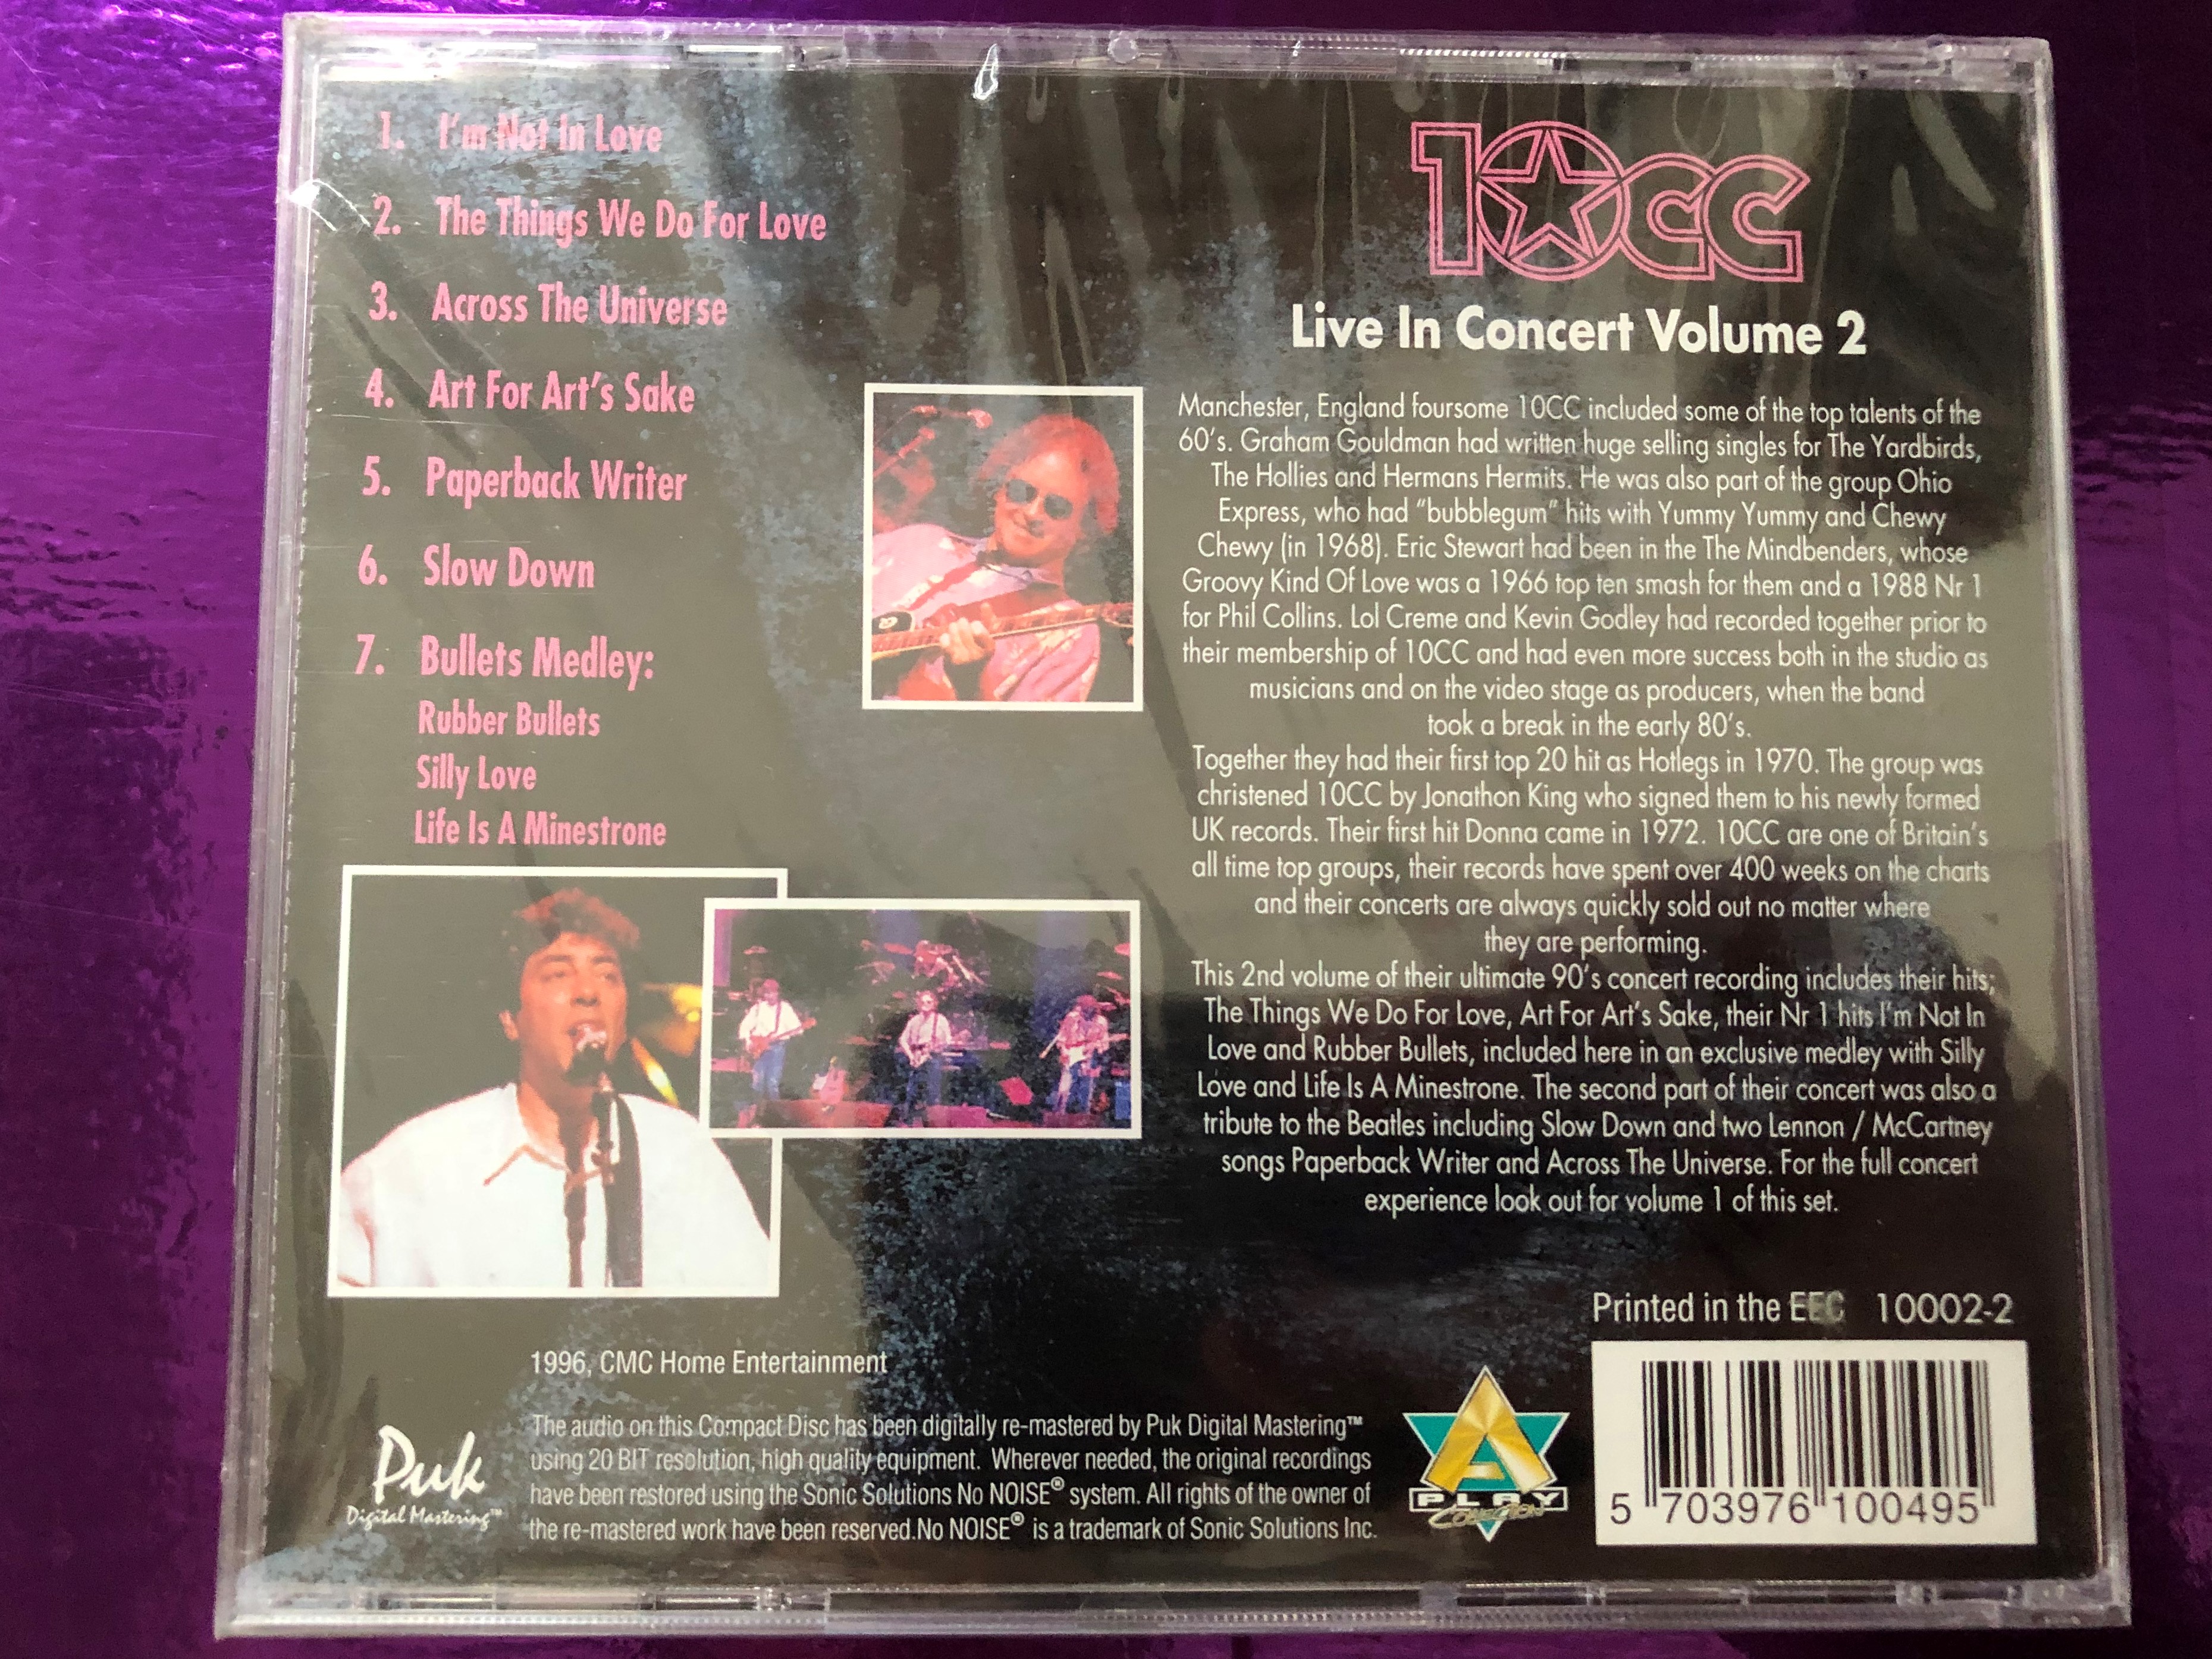 live-in-concert-volume-two-10cc-a-play-collection-audio-cd-1996-10002-2-2-.jpg